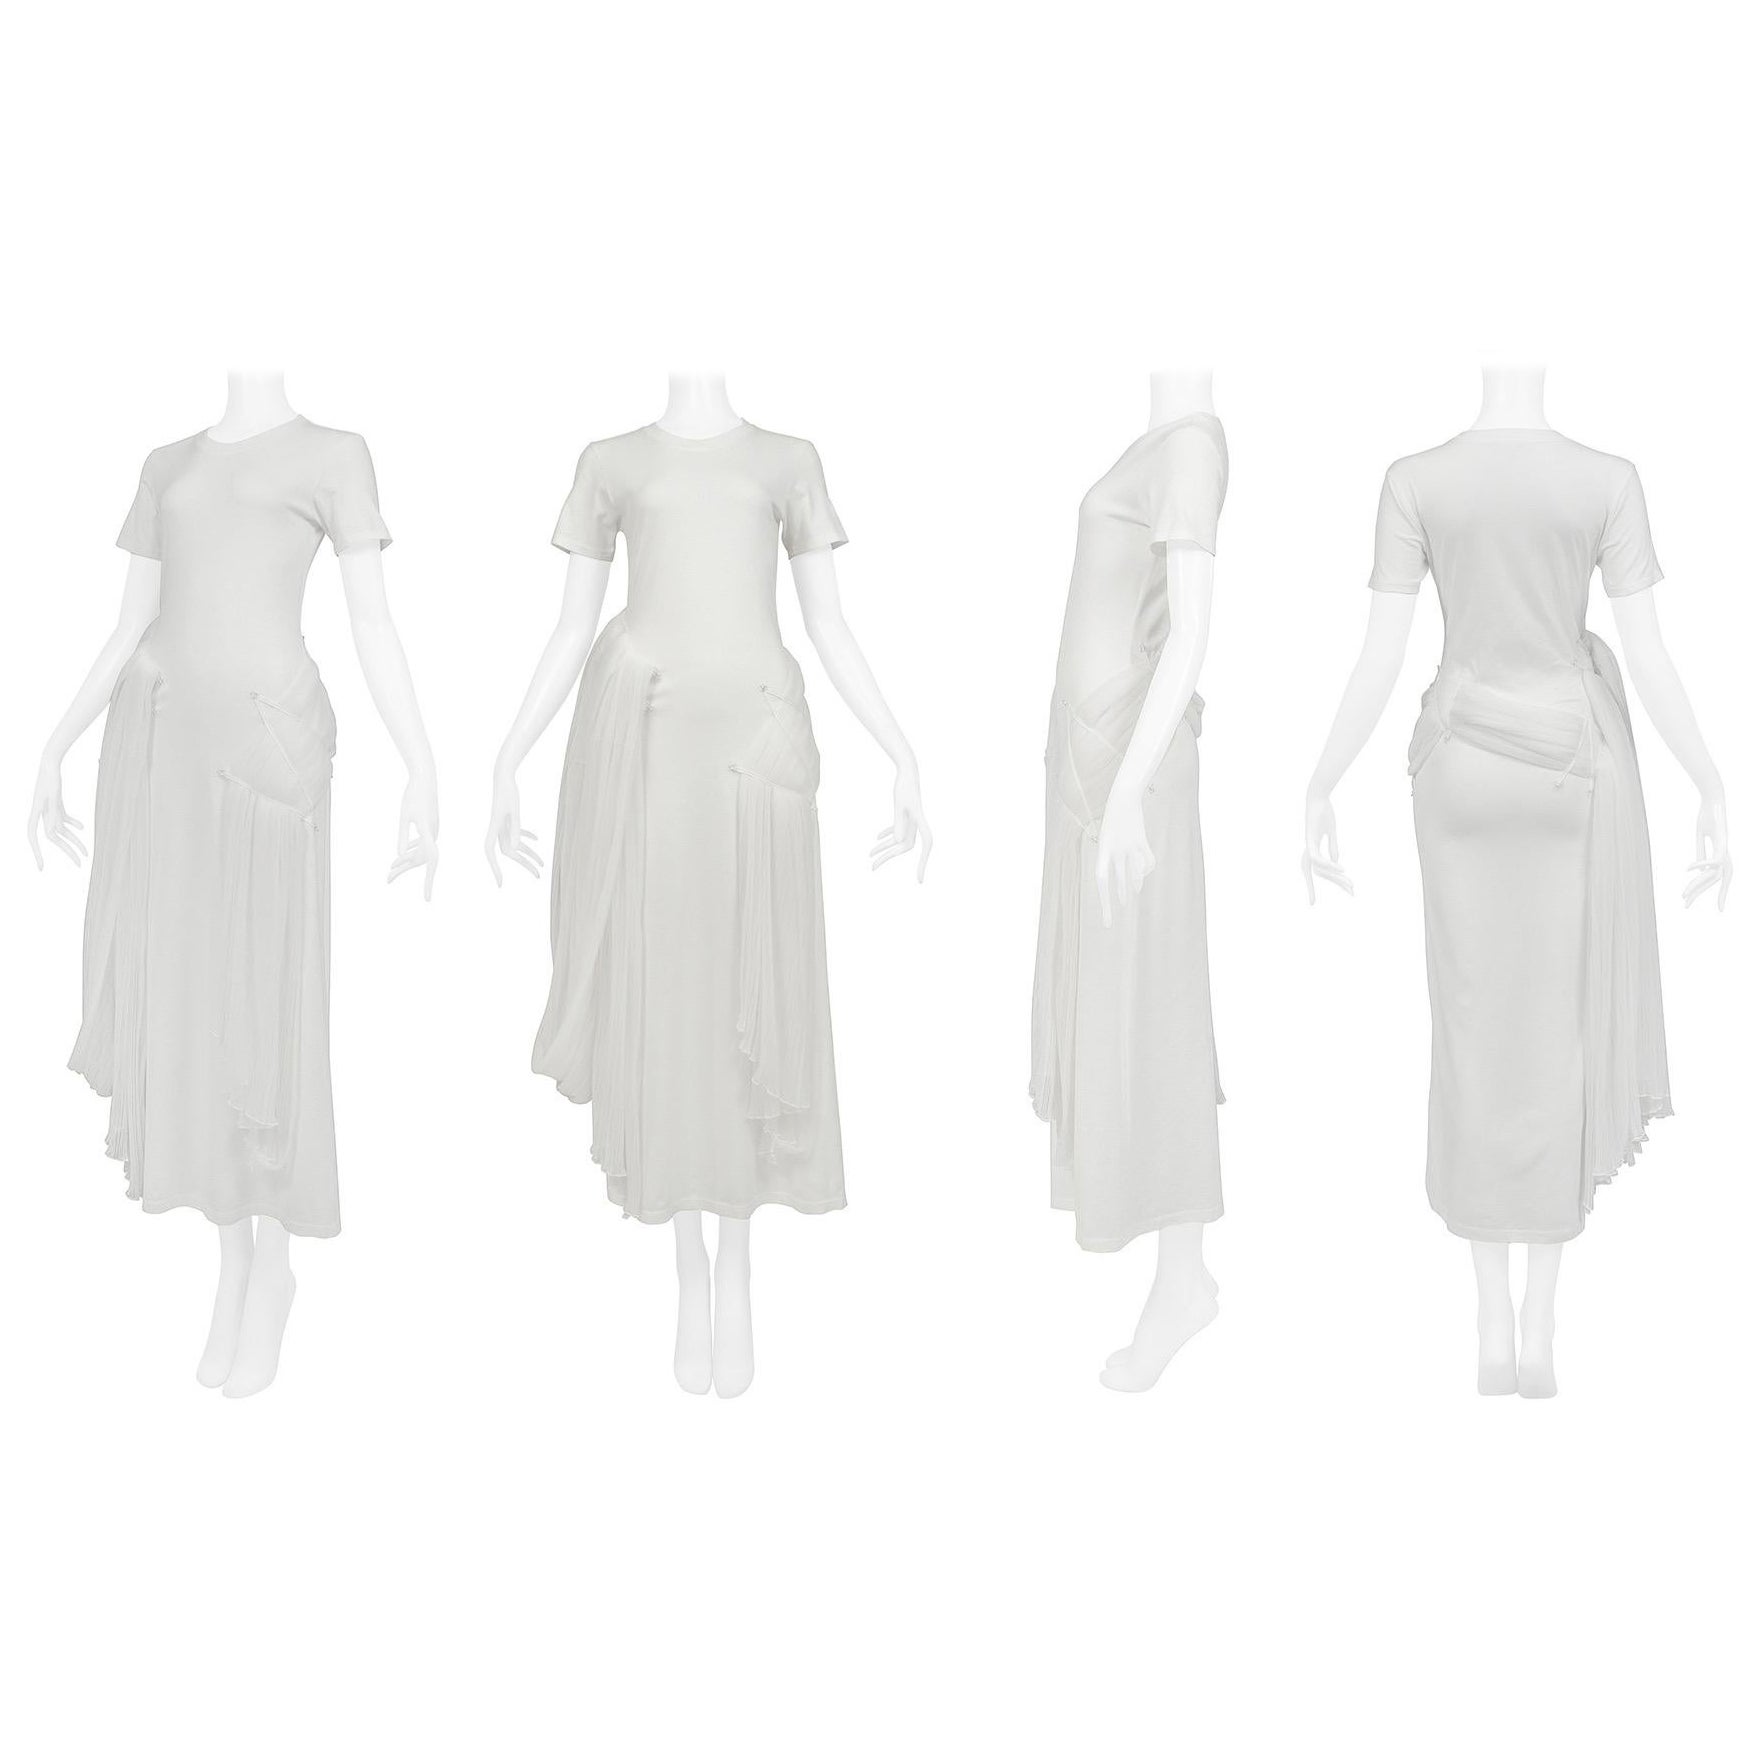 Issey Miyake Iconic White Goddess Concept Dress 2003 For Sale